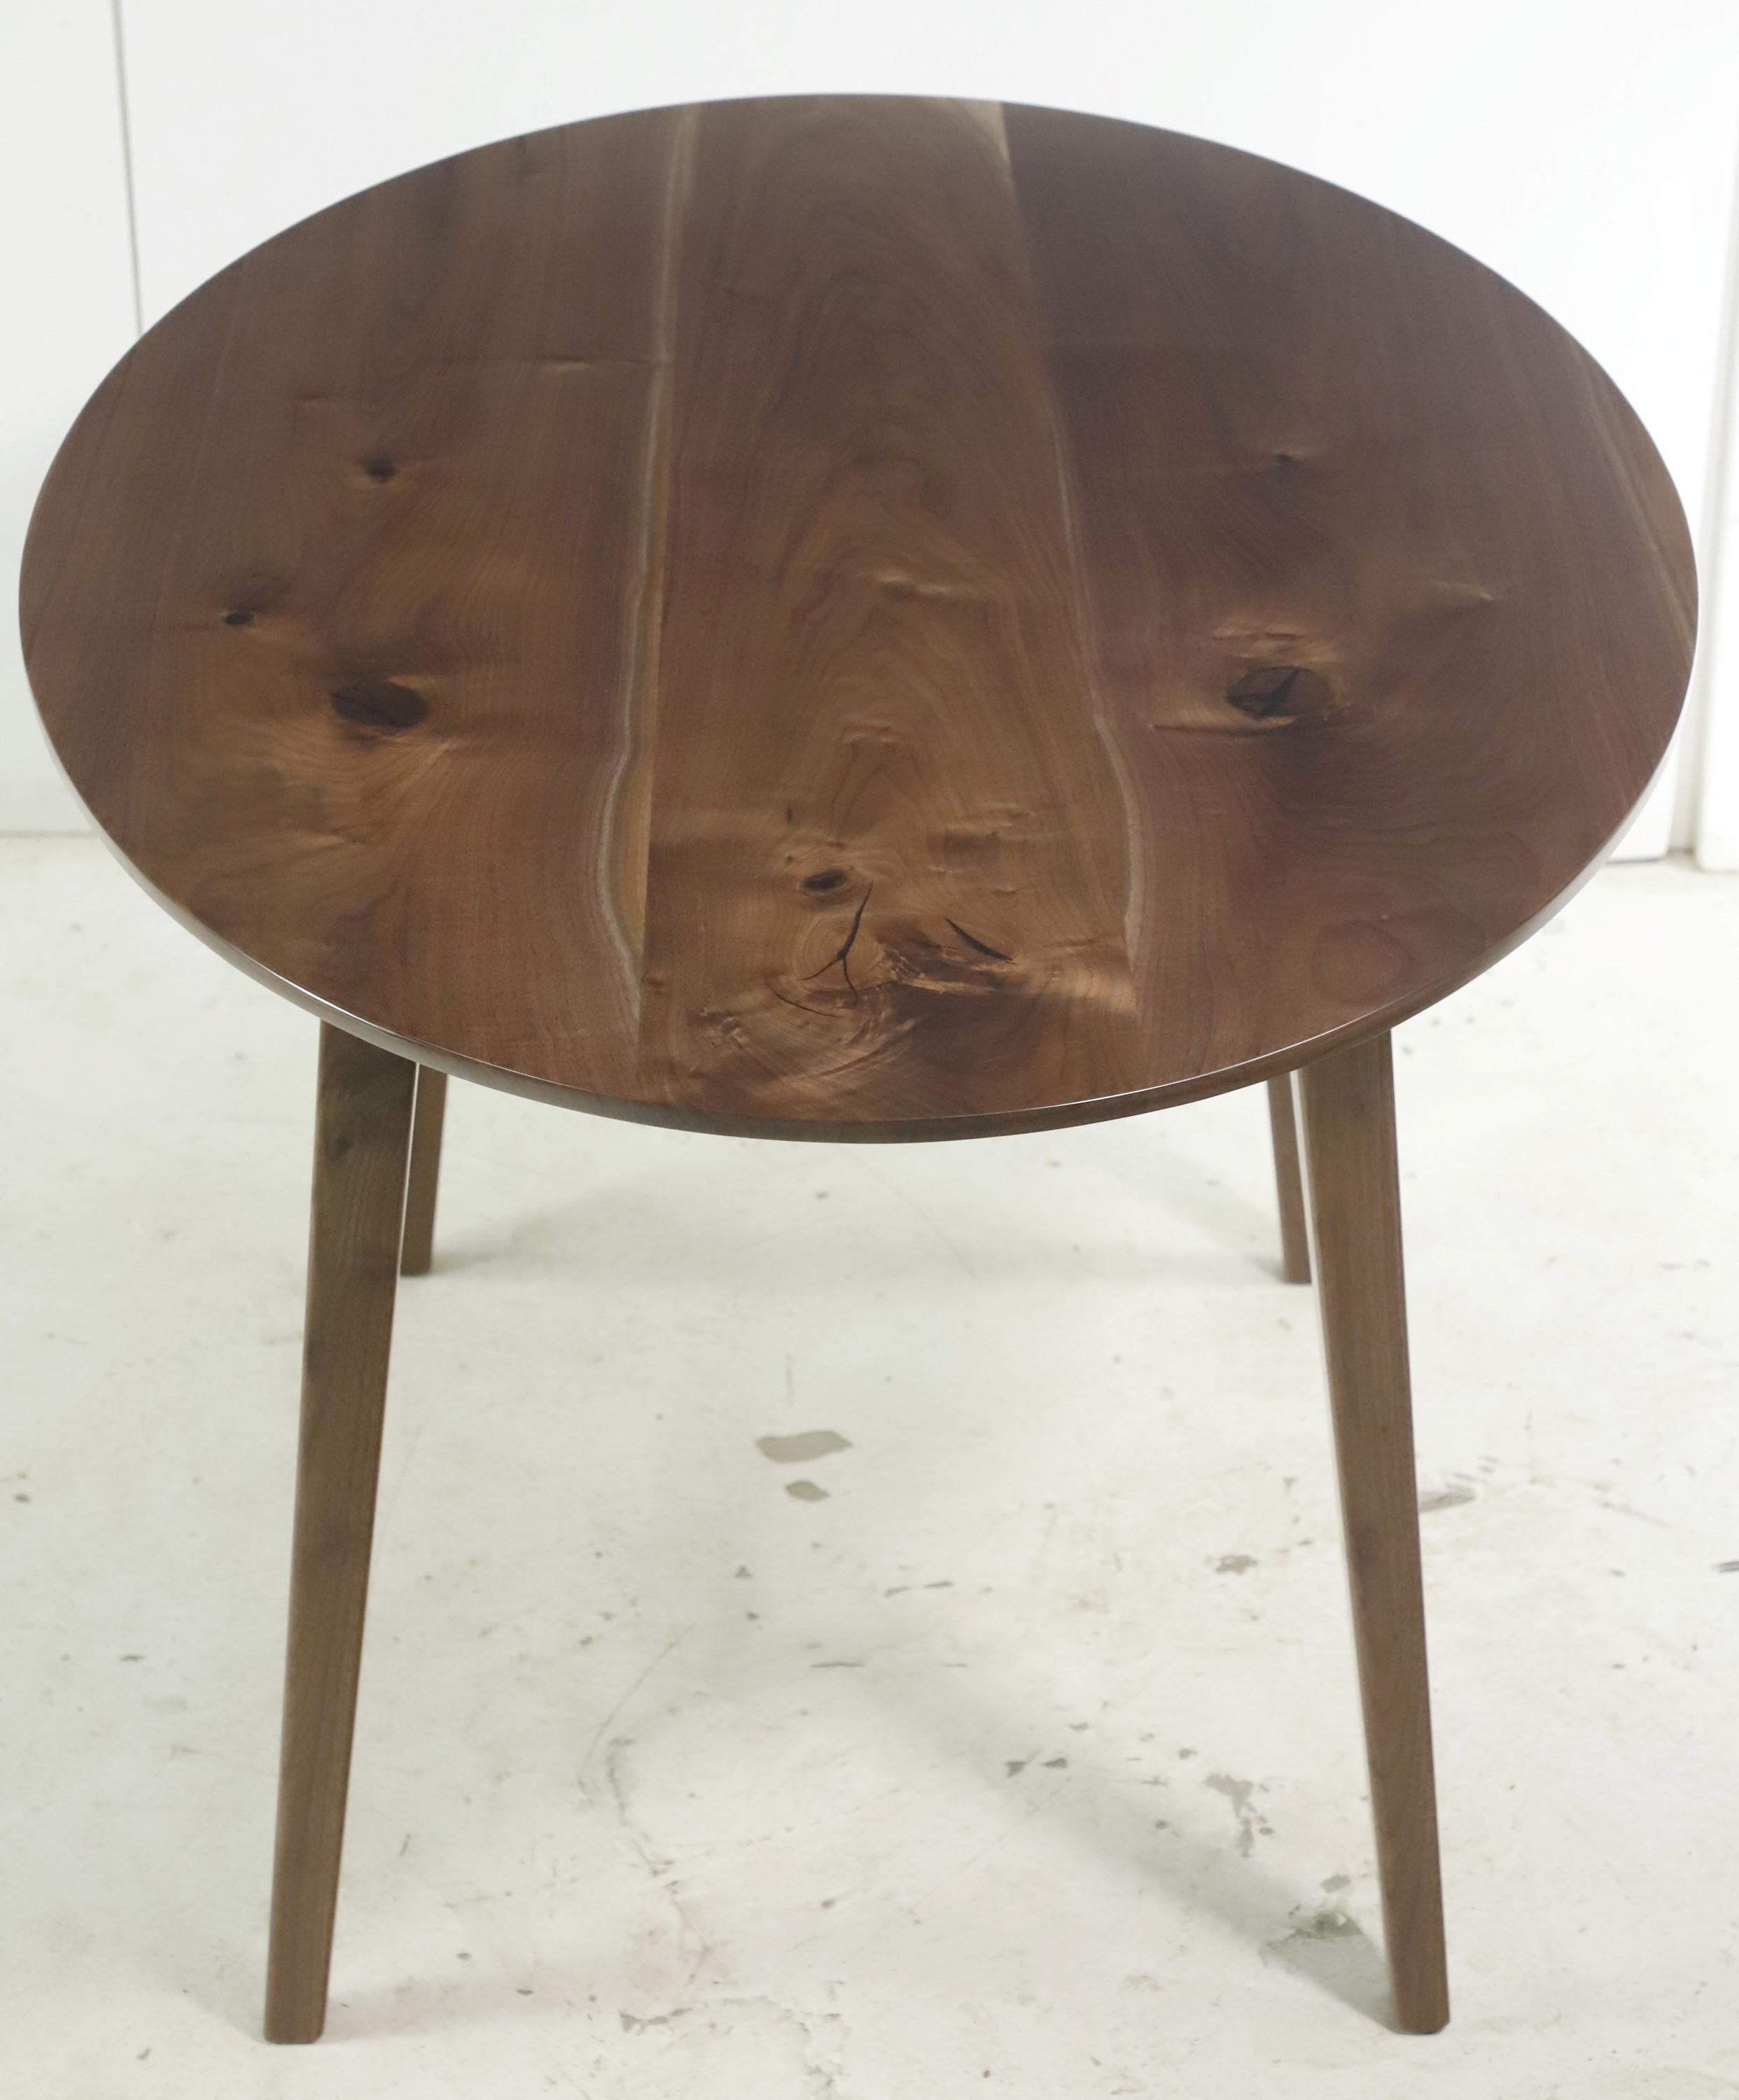 4.5 ft Long Oval Solid Walnut Tapered Leg  Table à manger Neuf - En vente à New York, NY